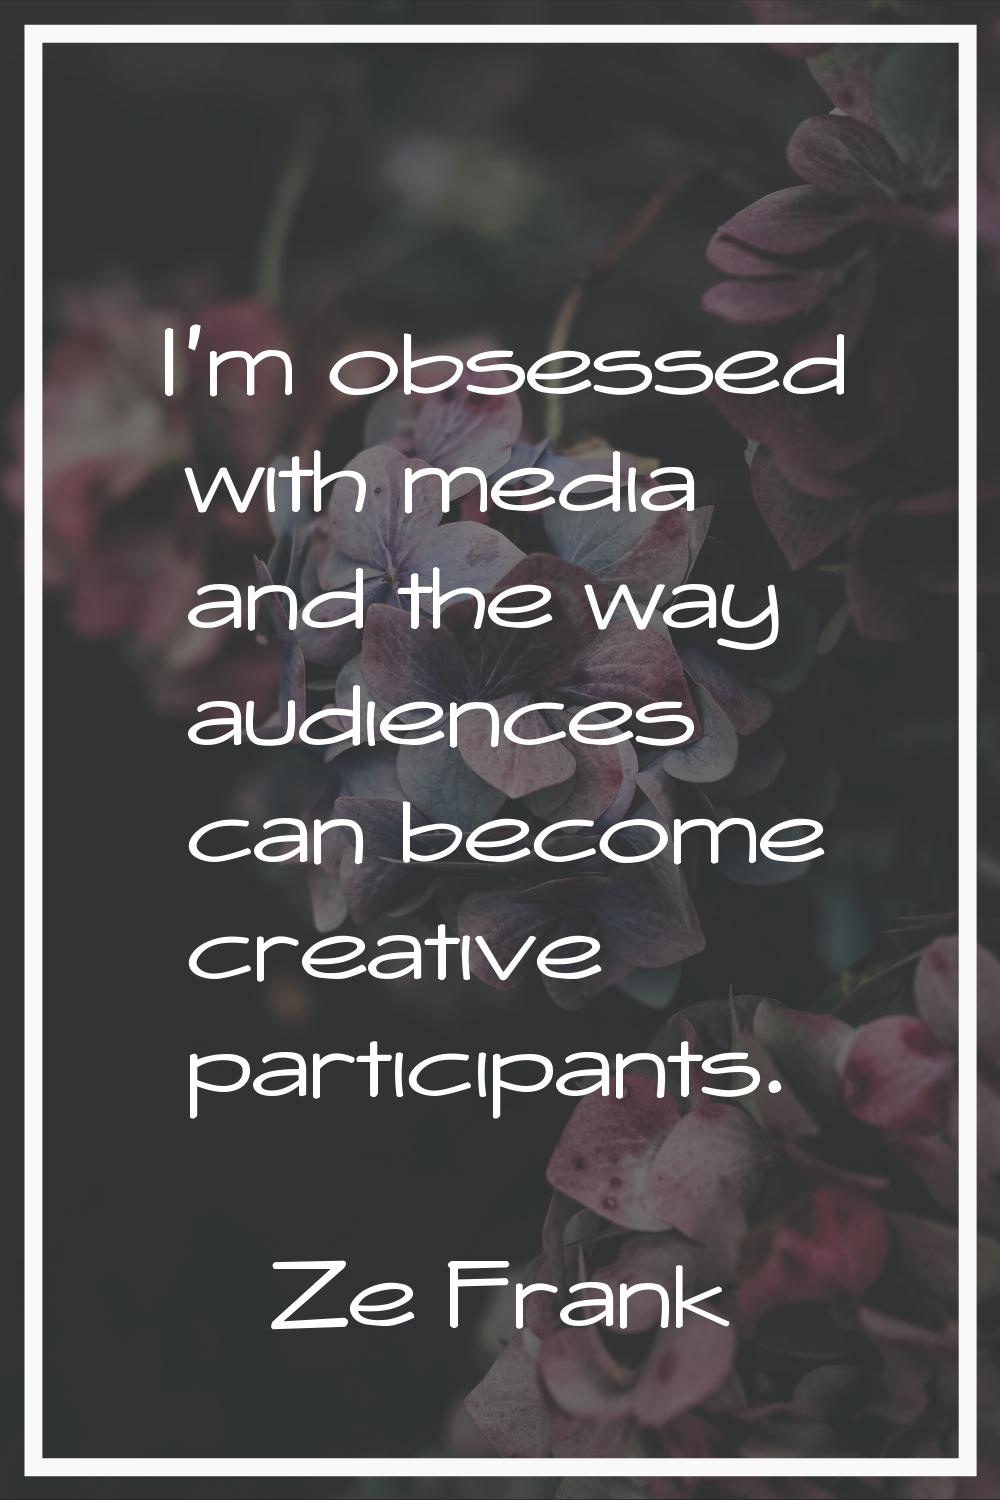 I'm obsessed with media and the way audiences can become creative participants.